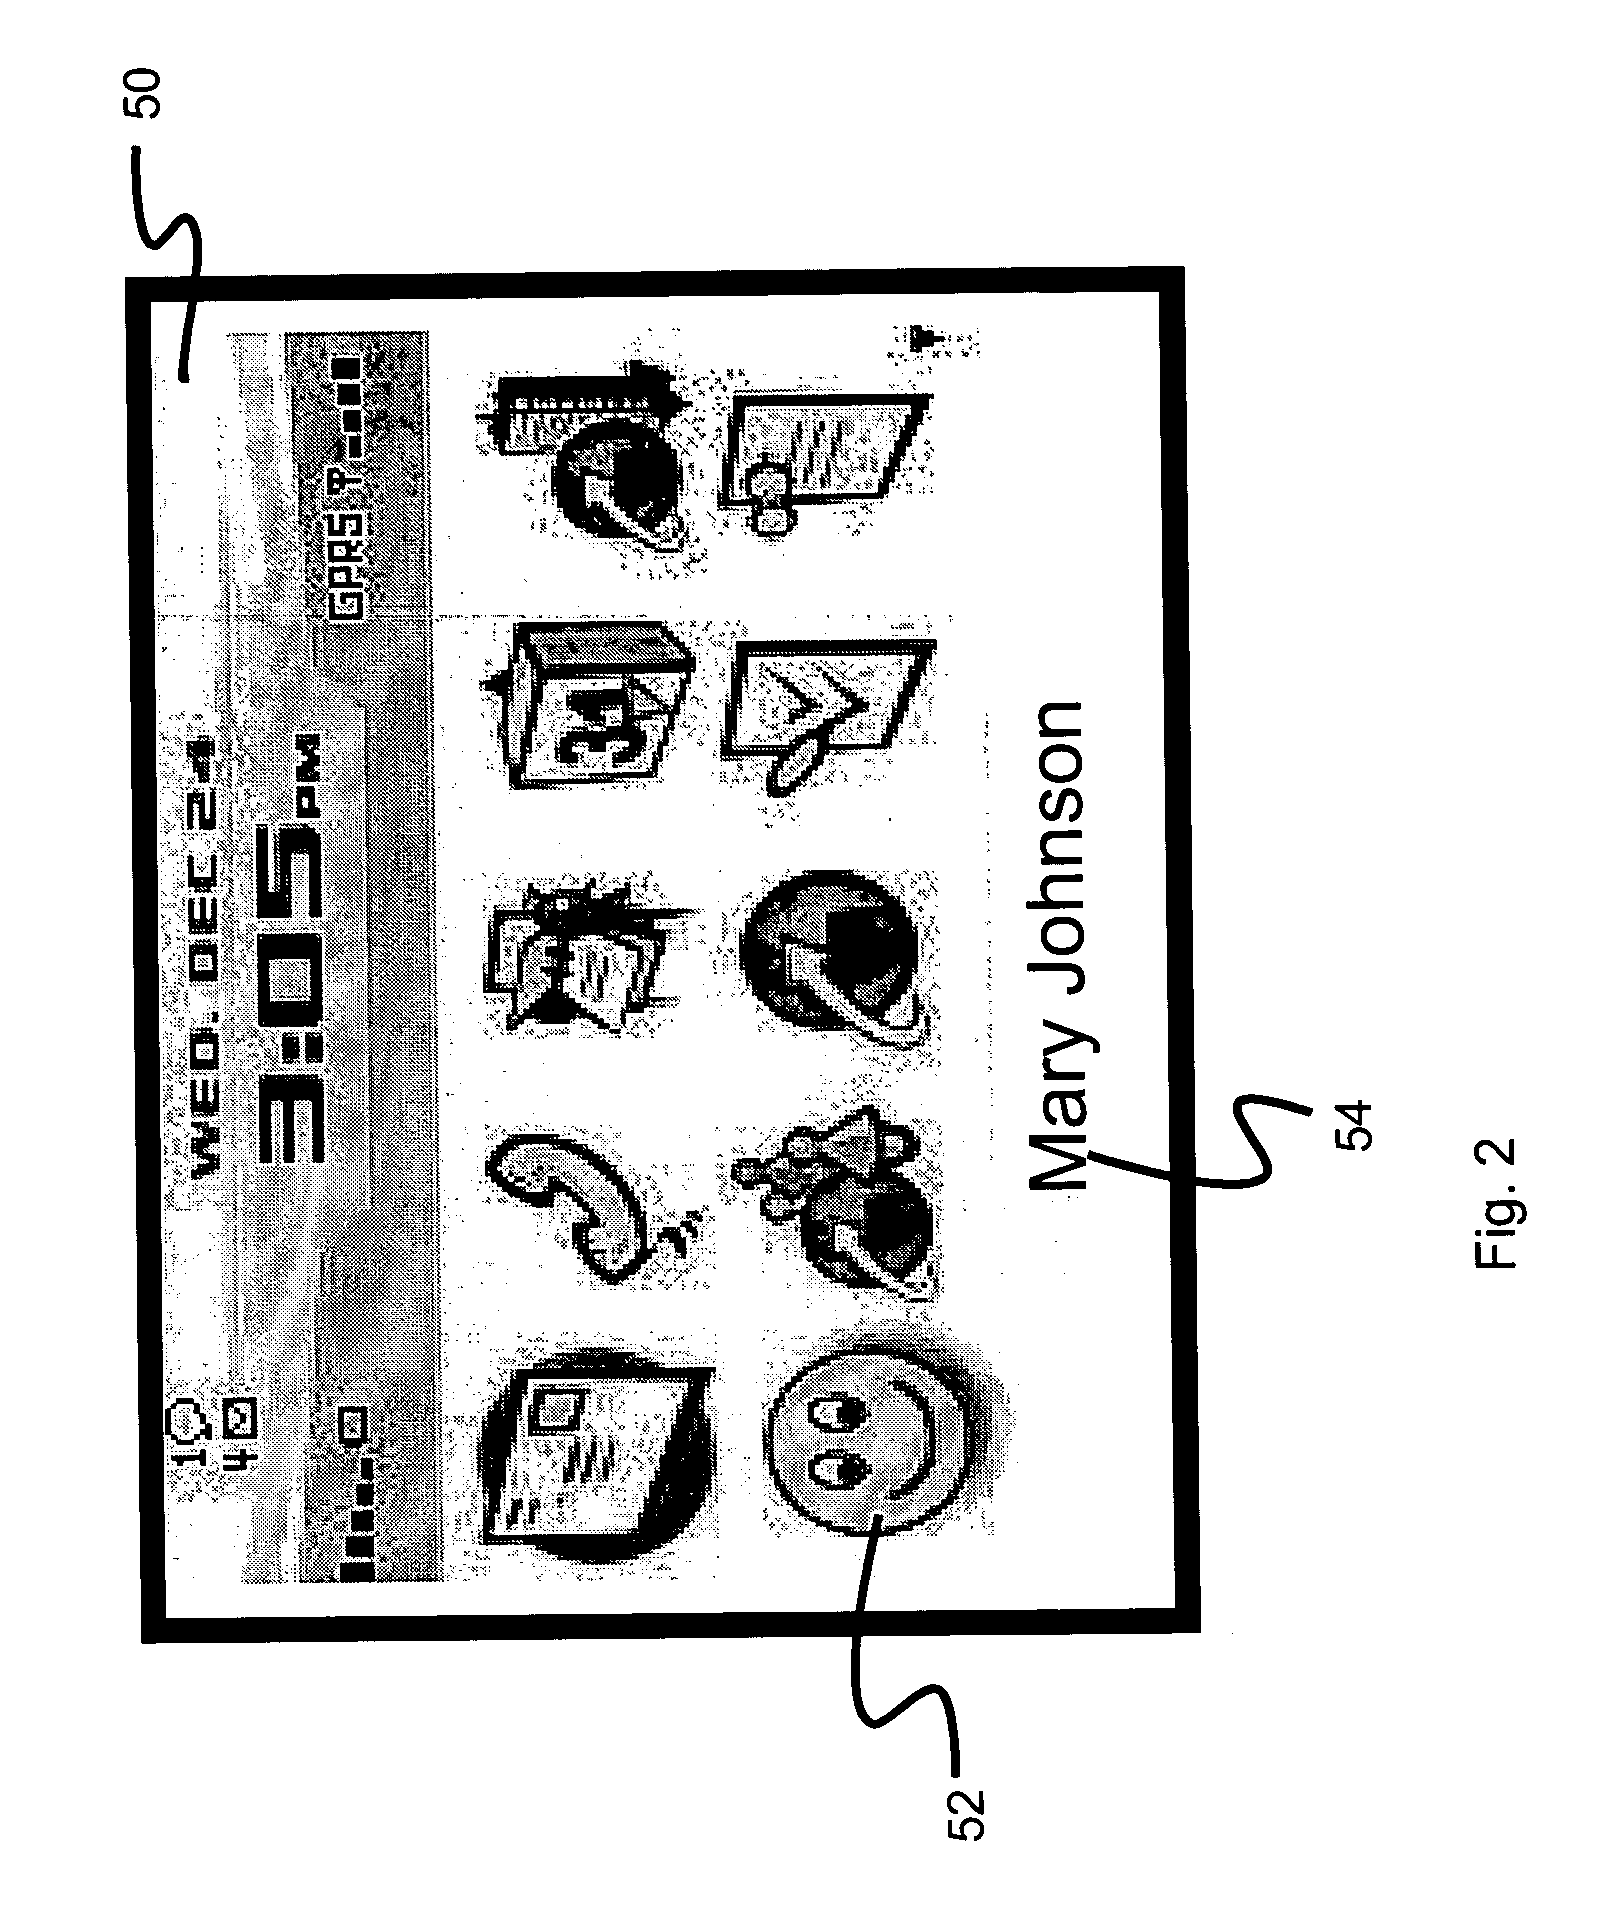 System and method for message display and management